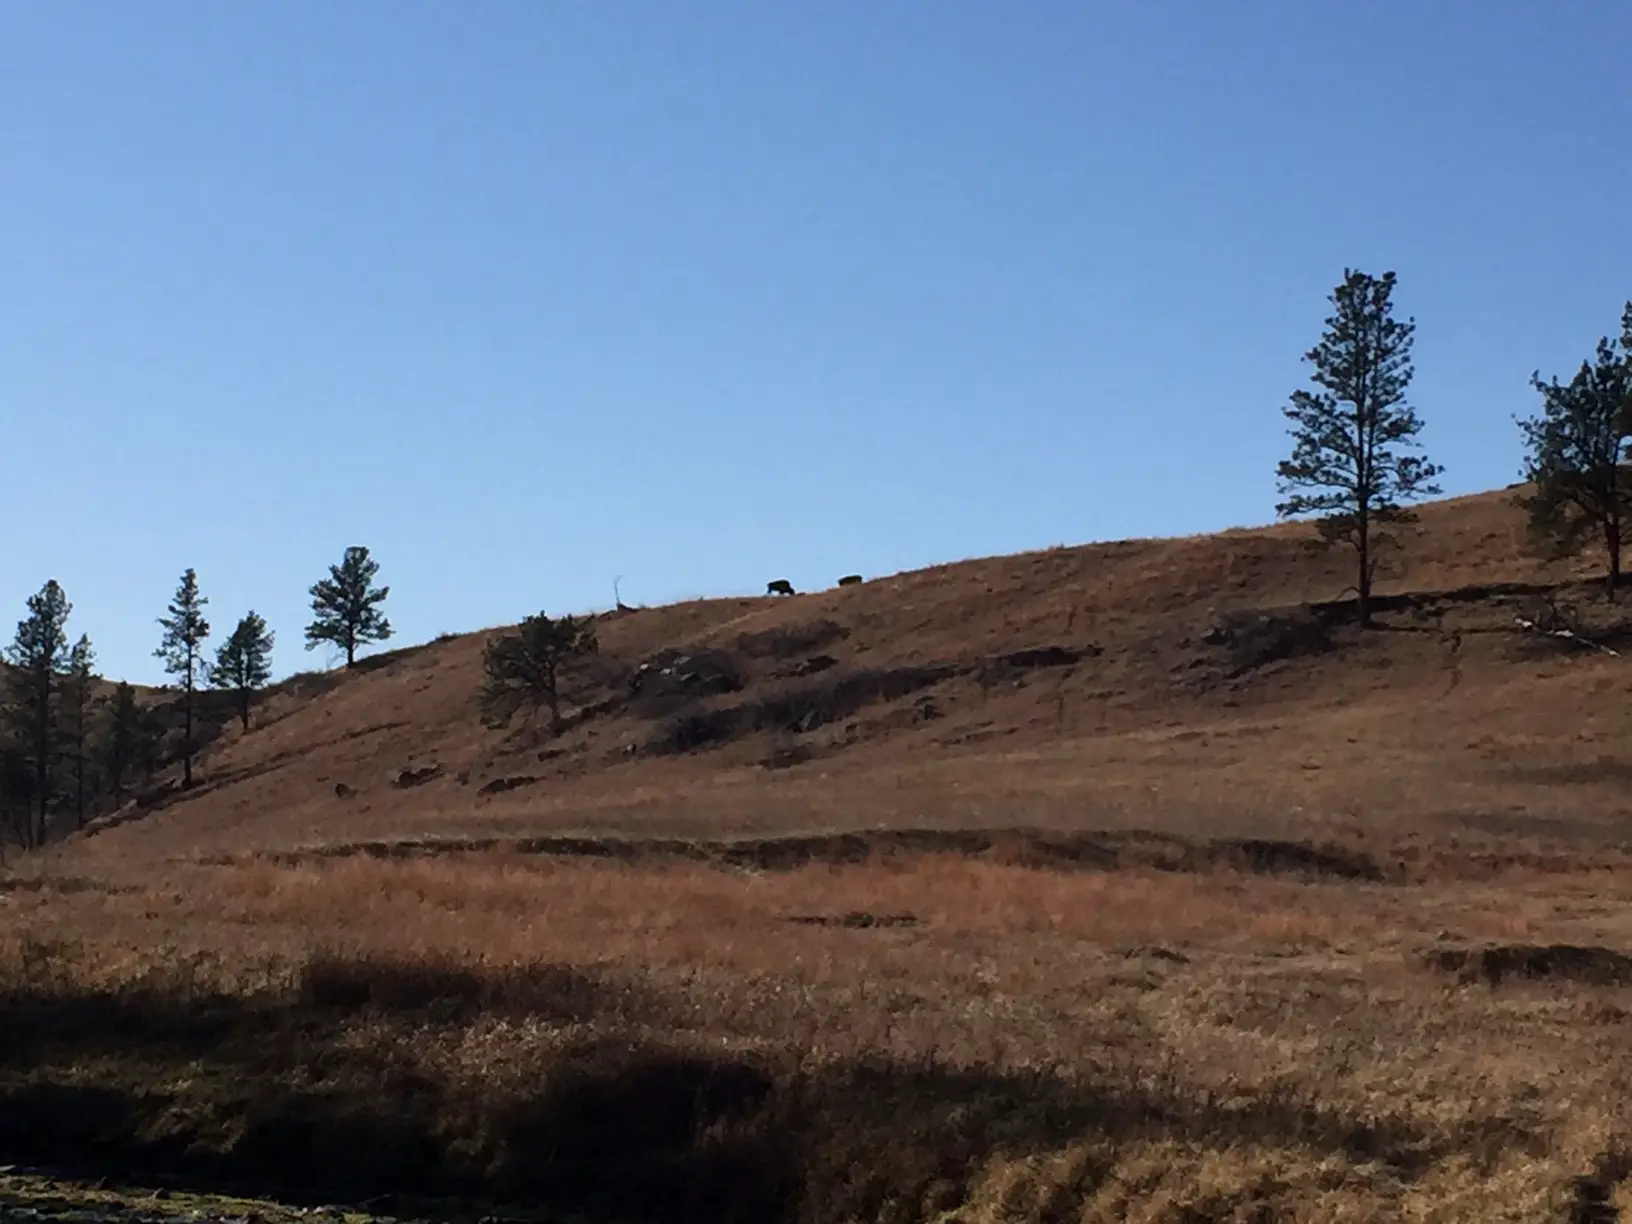 A brown-grassy hill dotted with pine trees, with two dark specks resembling buffalo at the top, all under a clear, blue sky.